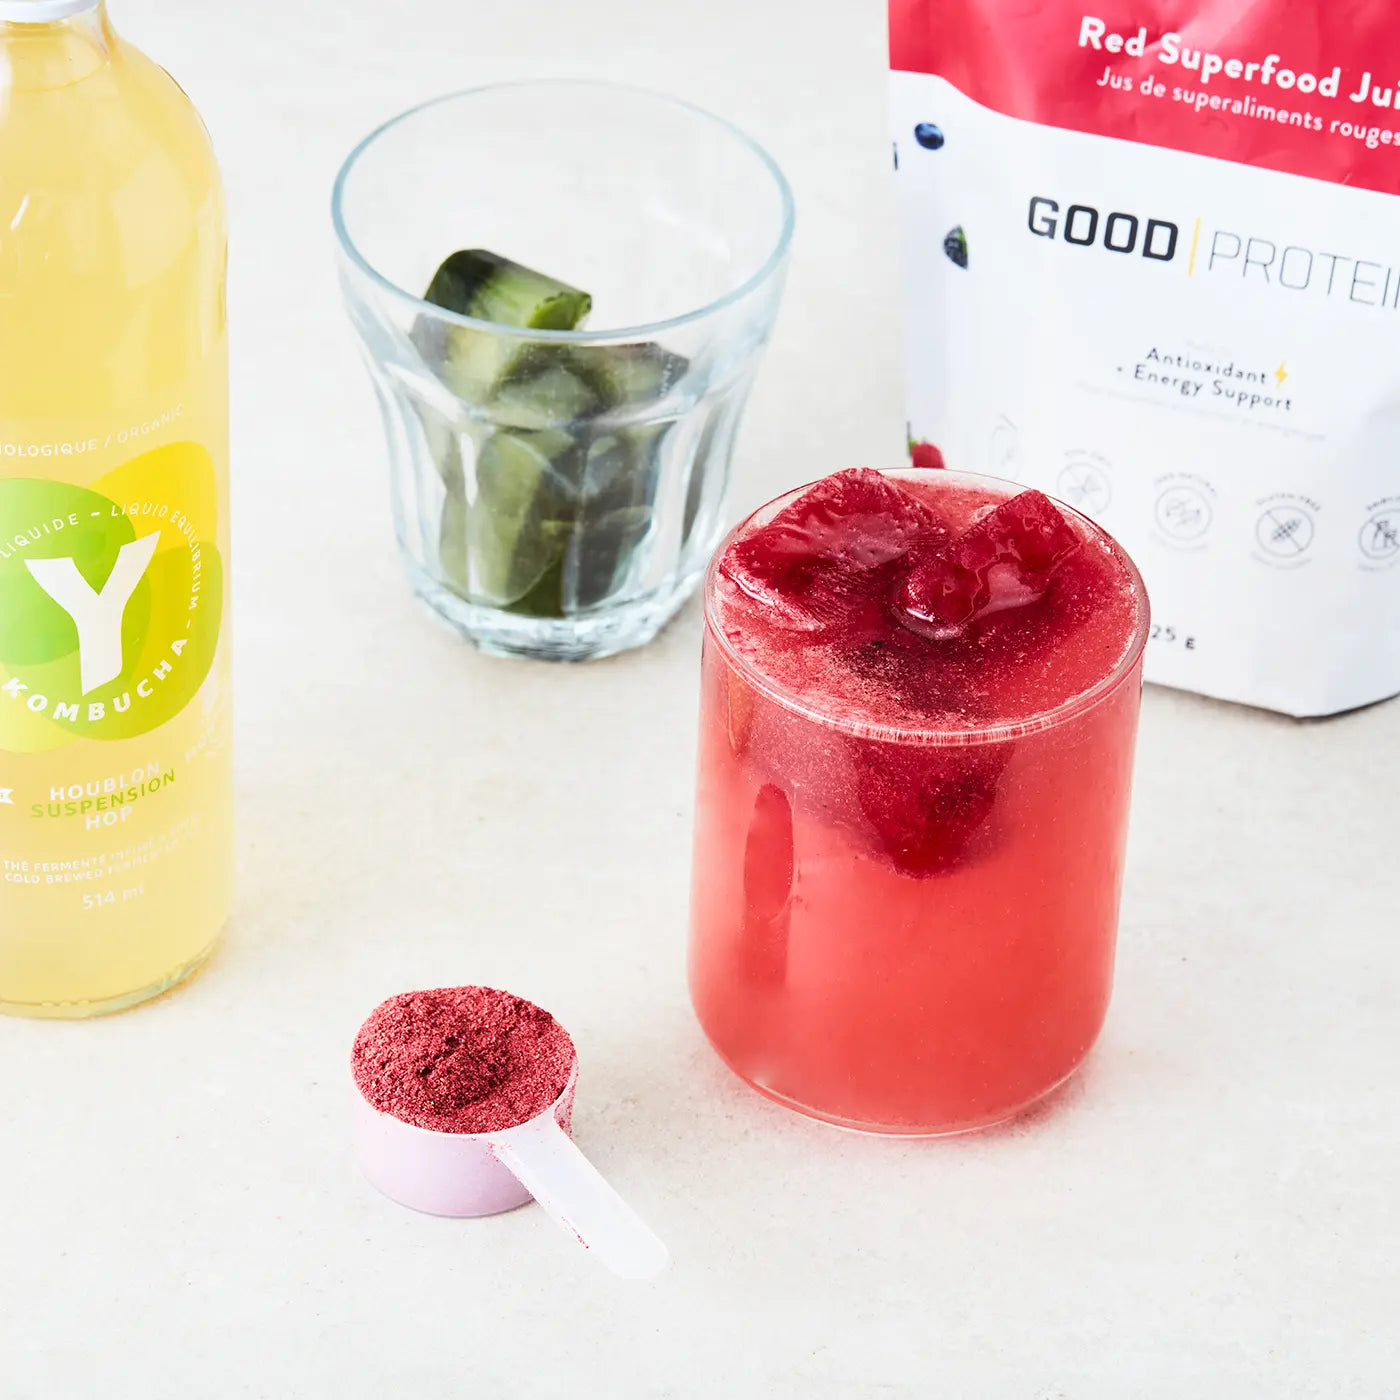 Superfood Y Kombucha with Christmas Ice Cubes - Good Protein